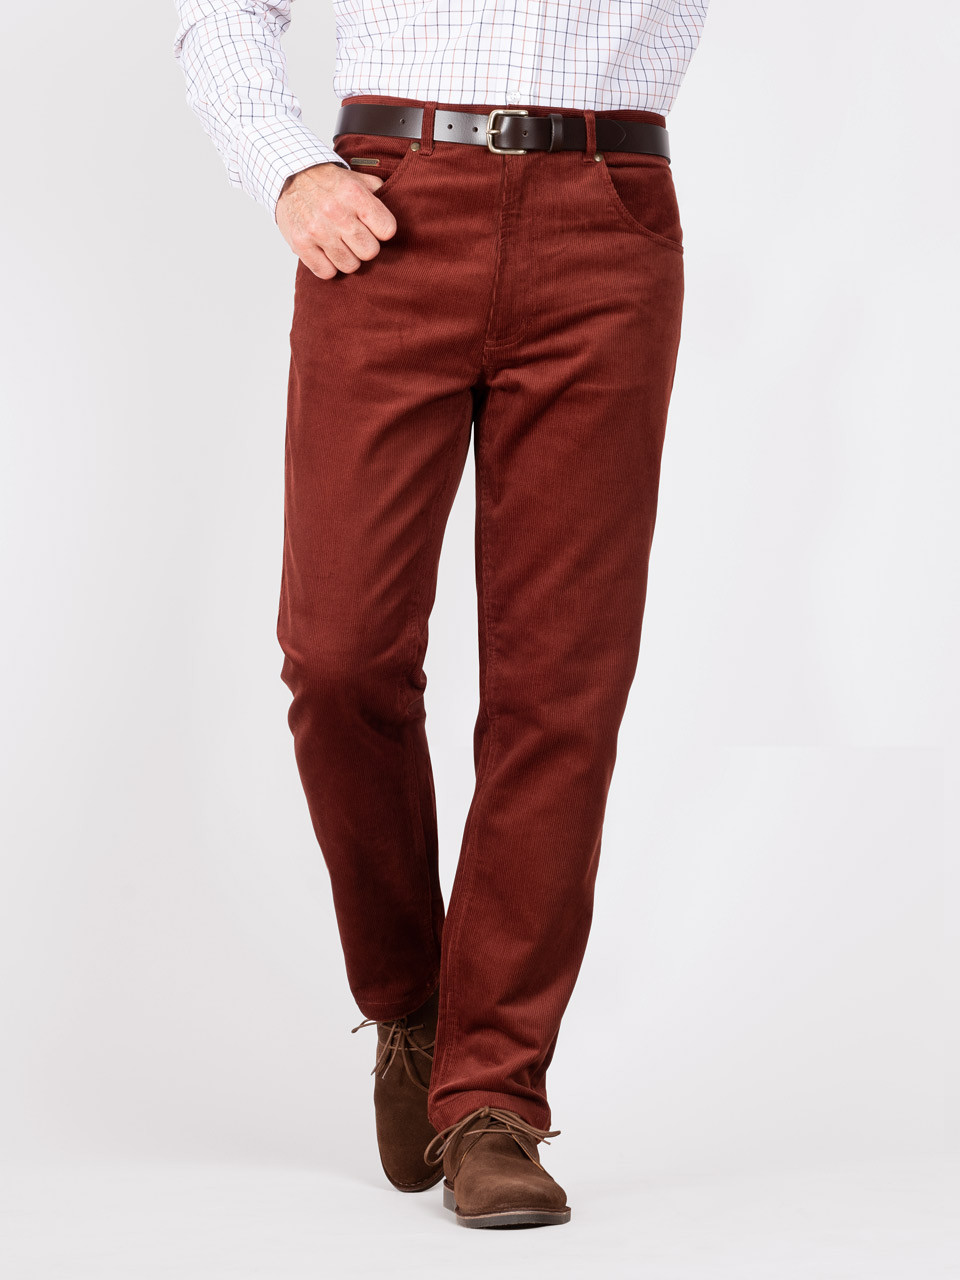 Chestnut Needle Cord Jeans